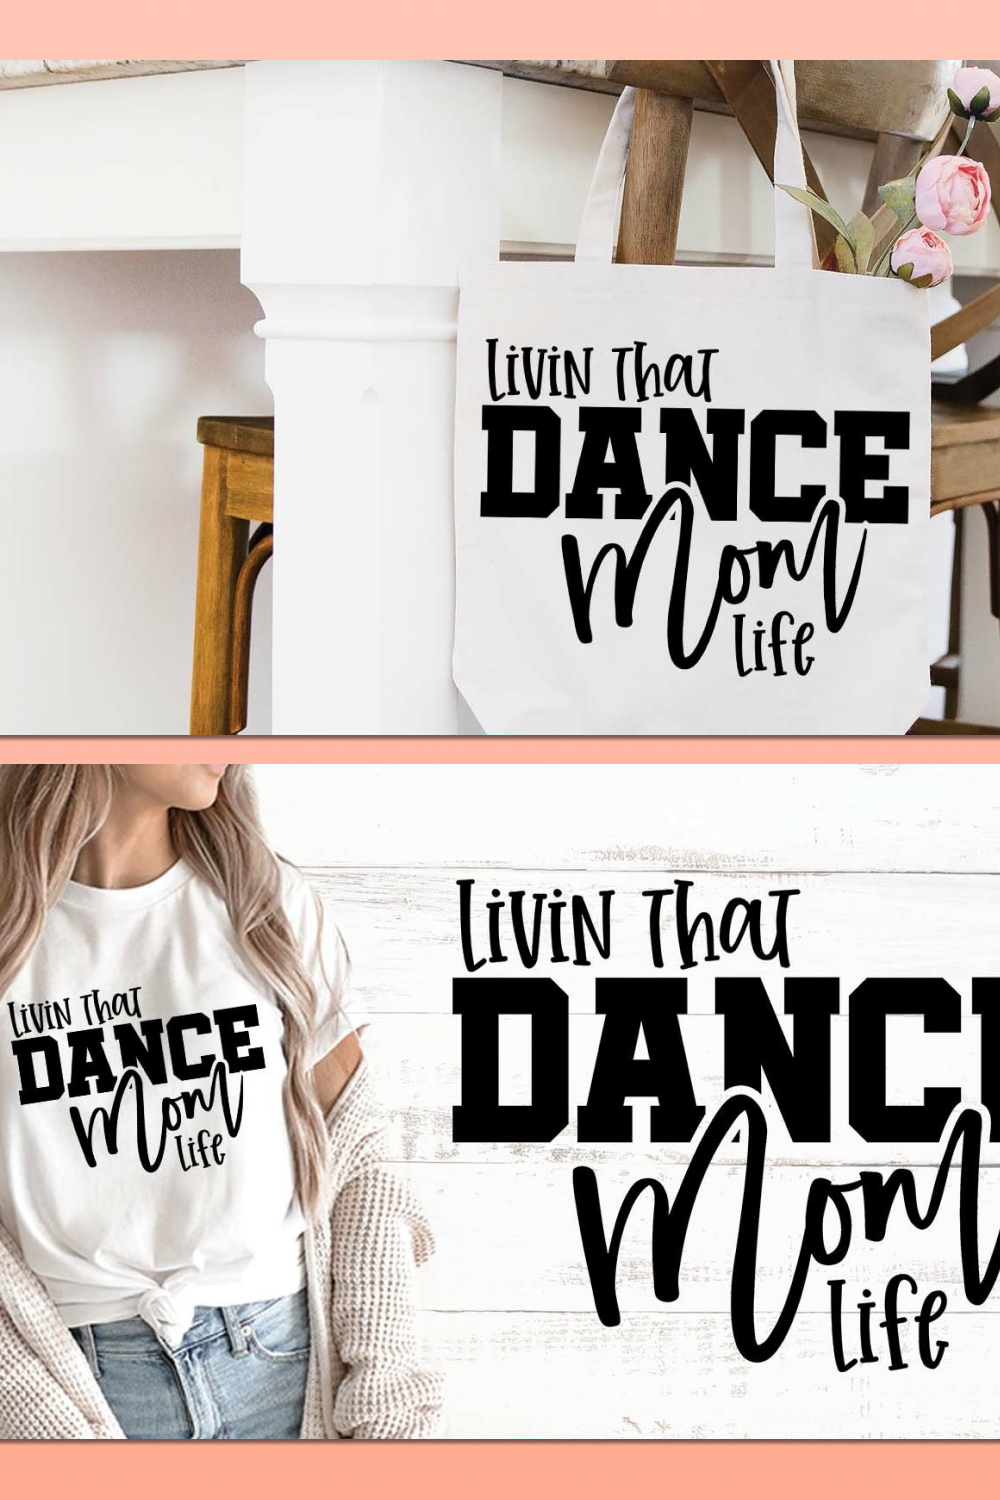 Wonderful stylish inscriptions about a dancer mother.